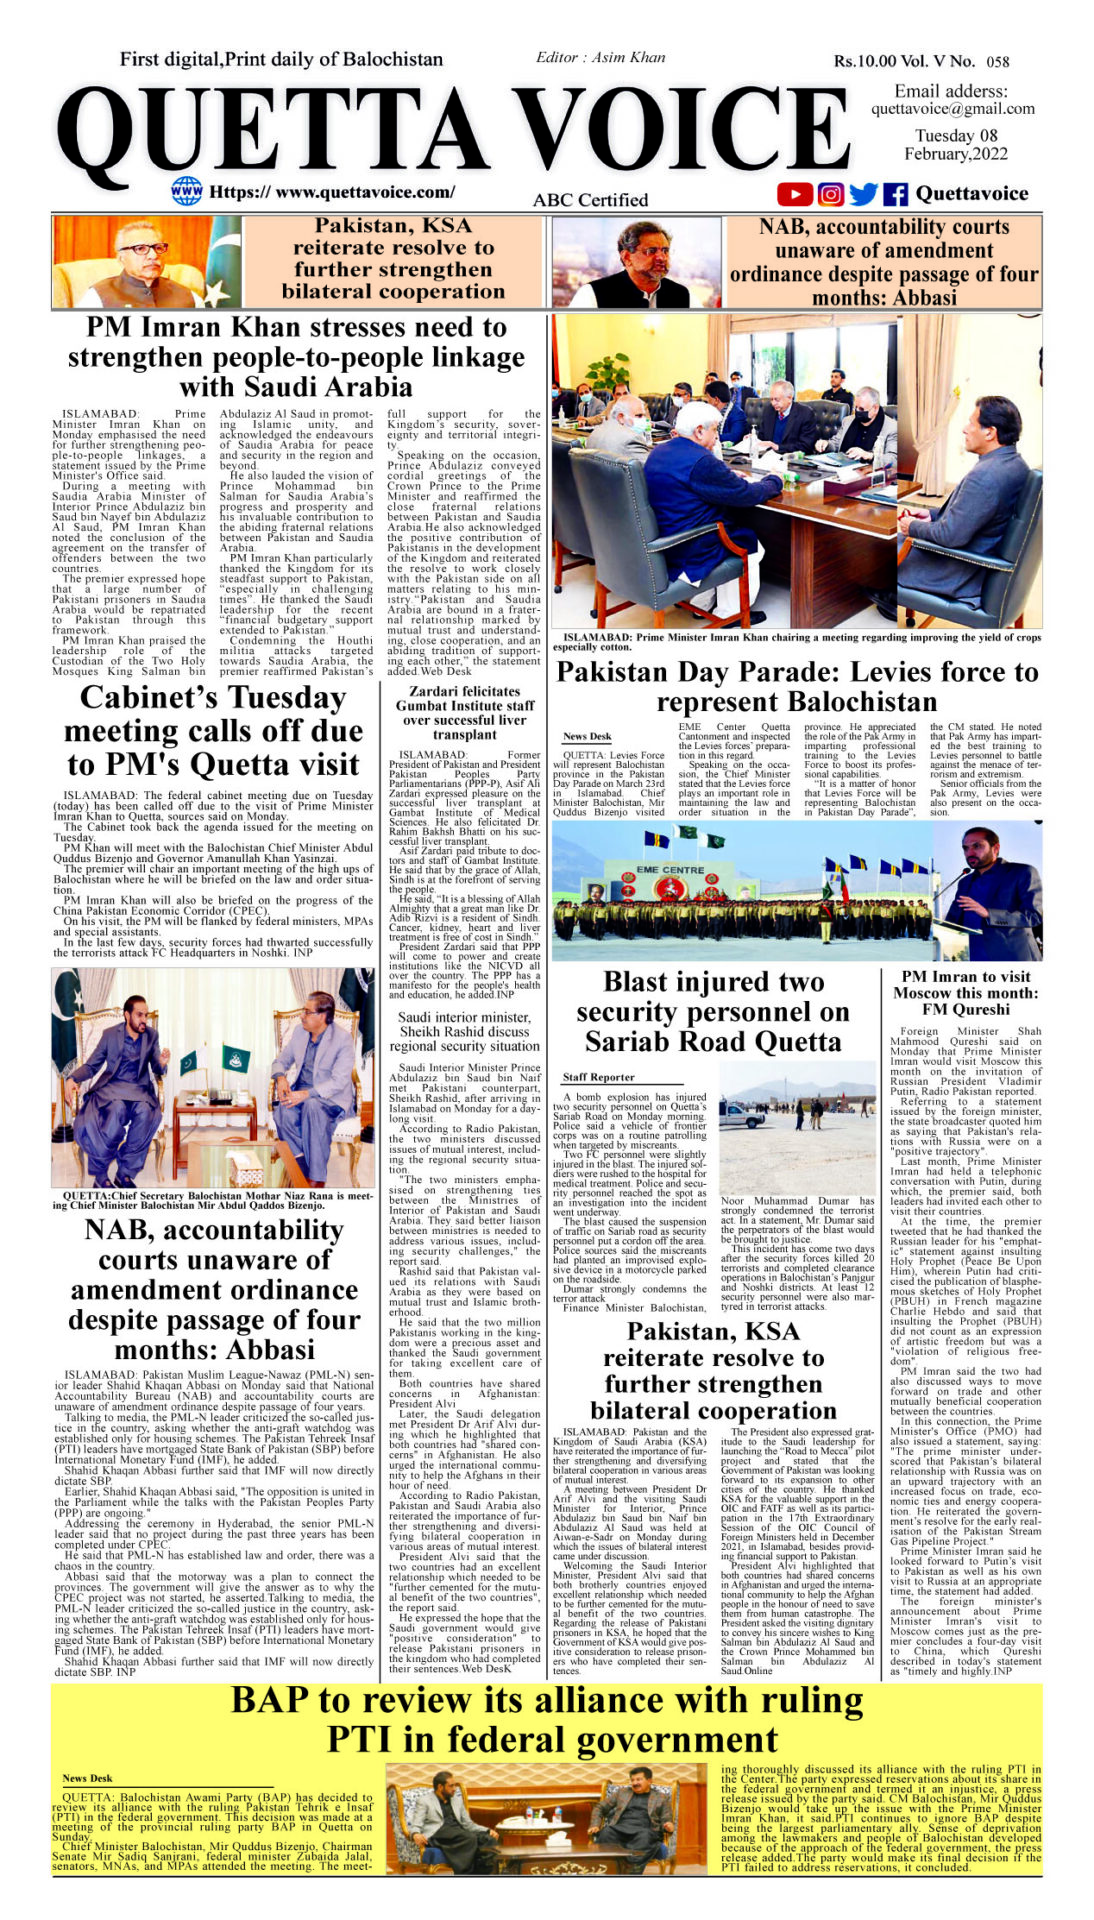 Today's Quetta Voice Newspaper, Tuesday, February 8, 2022